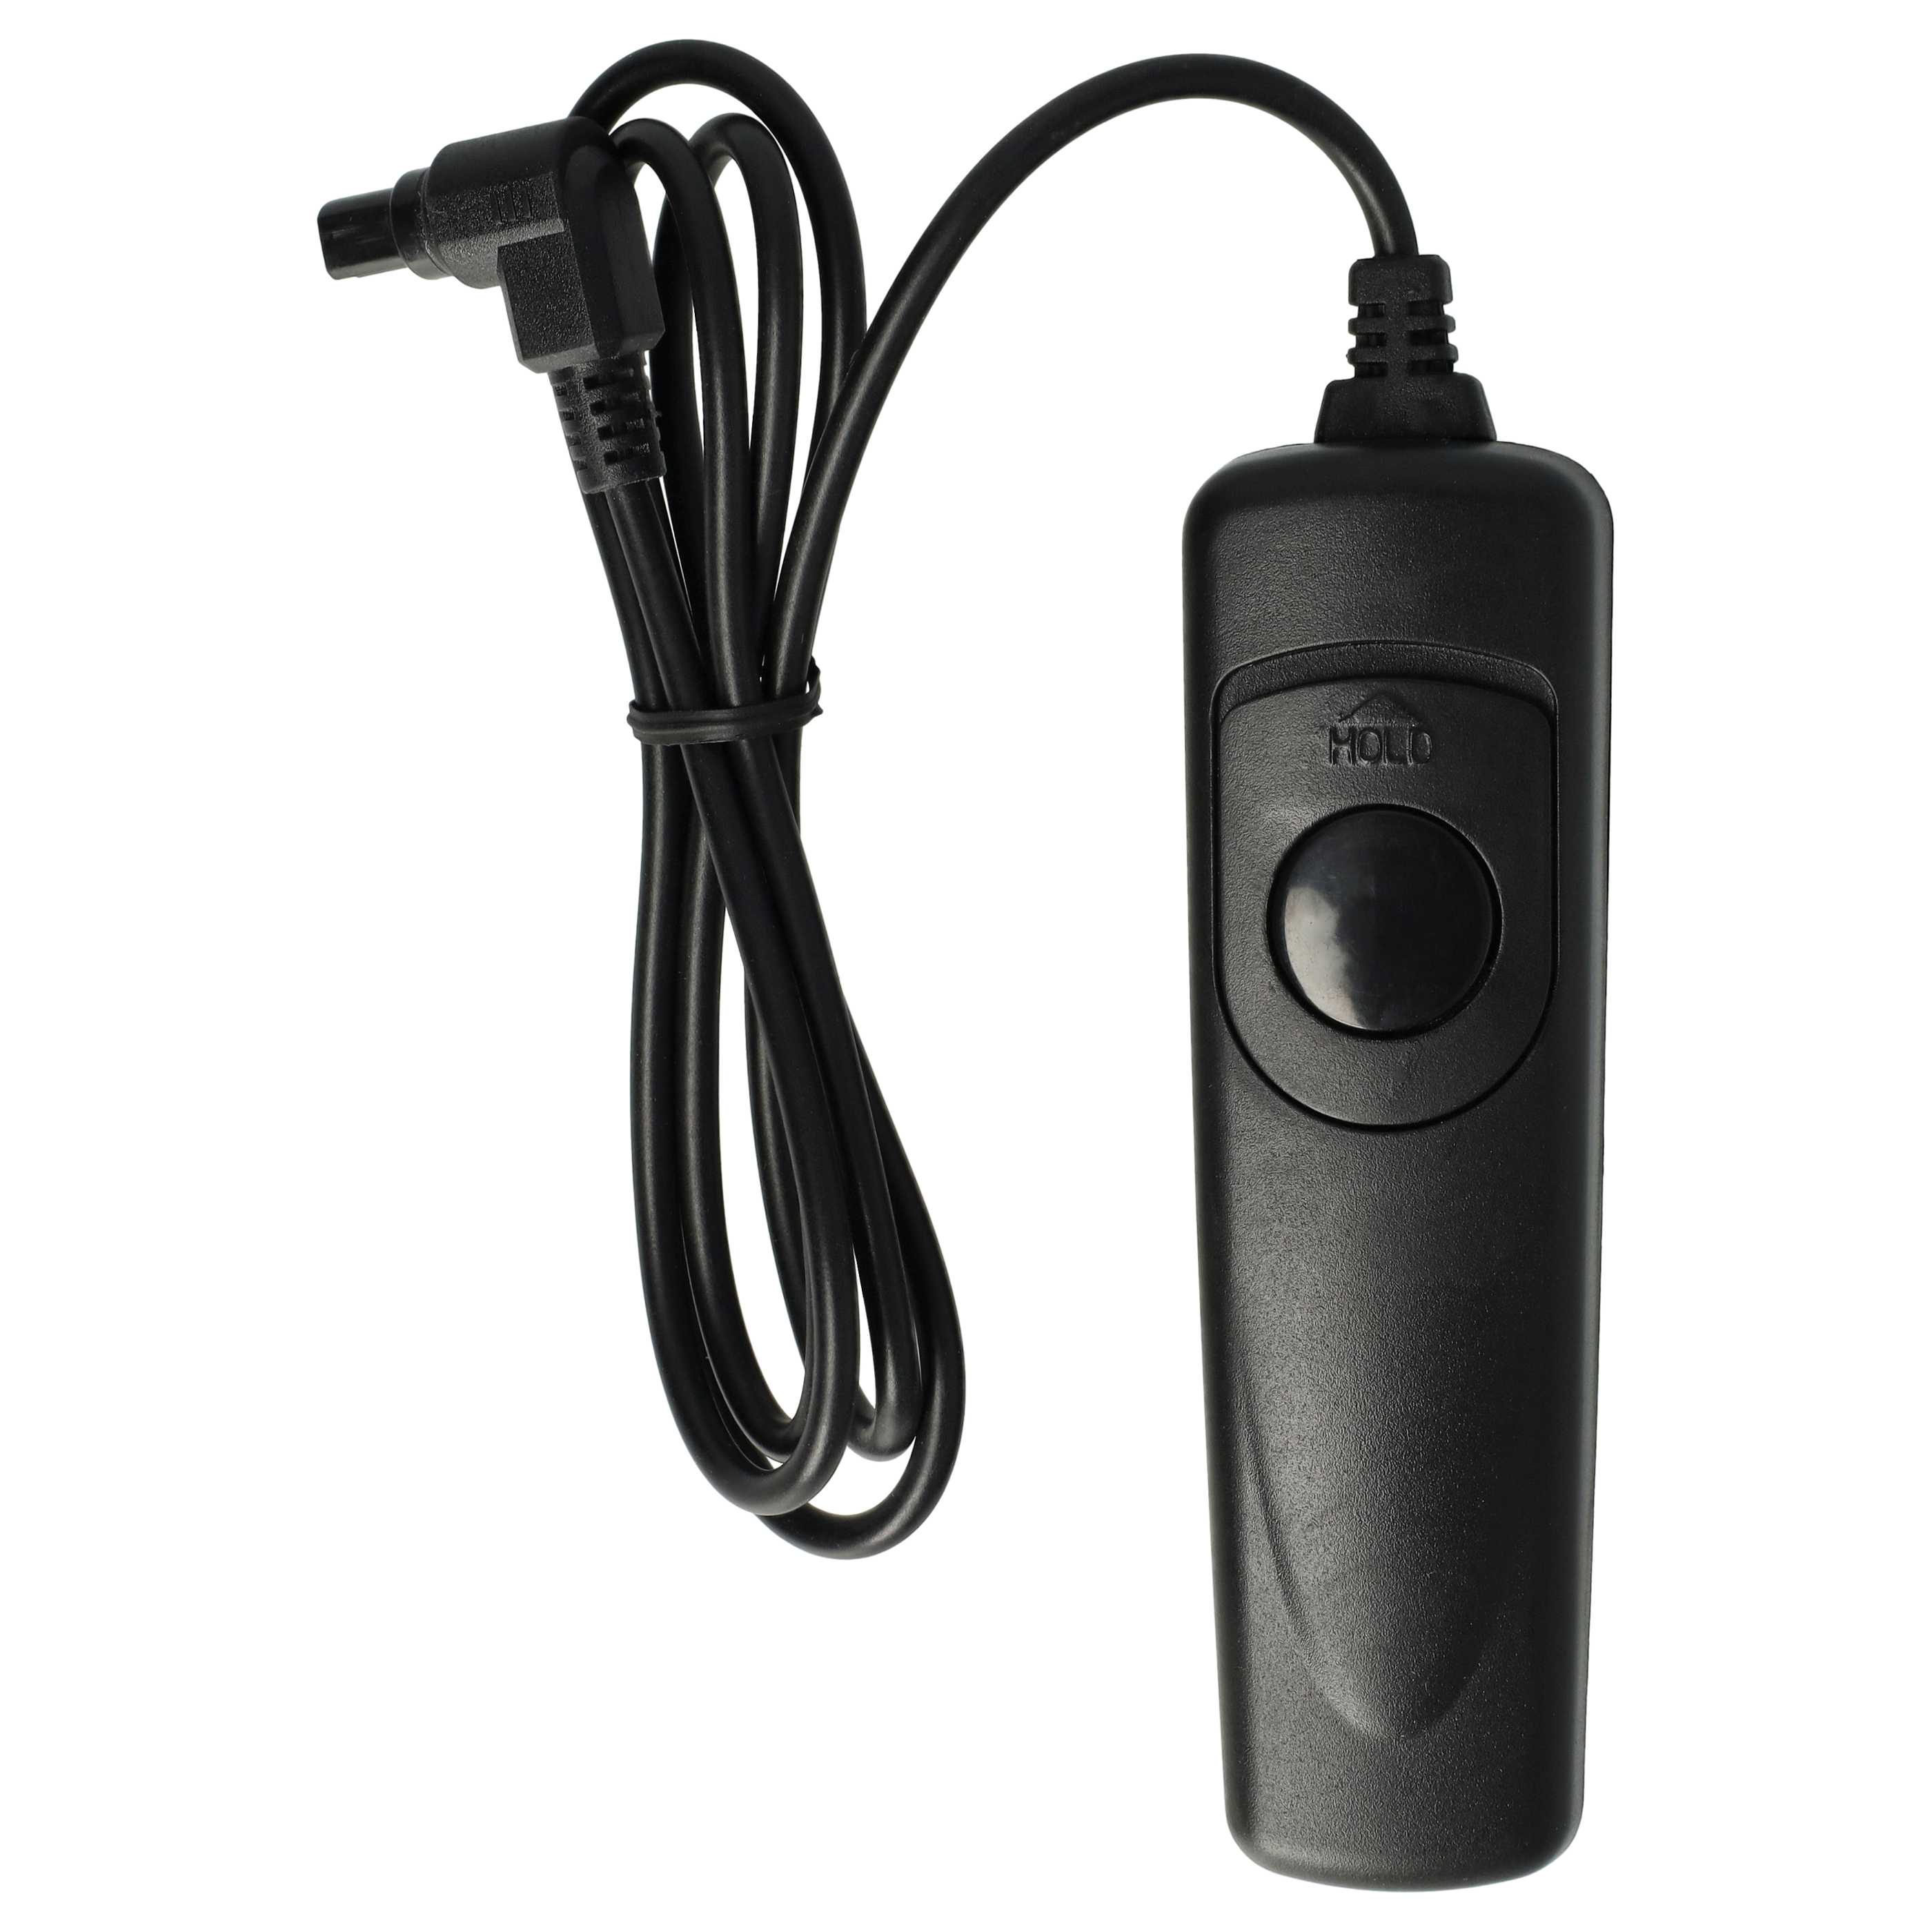 Remote Trigger as Exchange for Canon RS-80N3 for Camera 2-Step Shutter, 1 m Lead